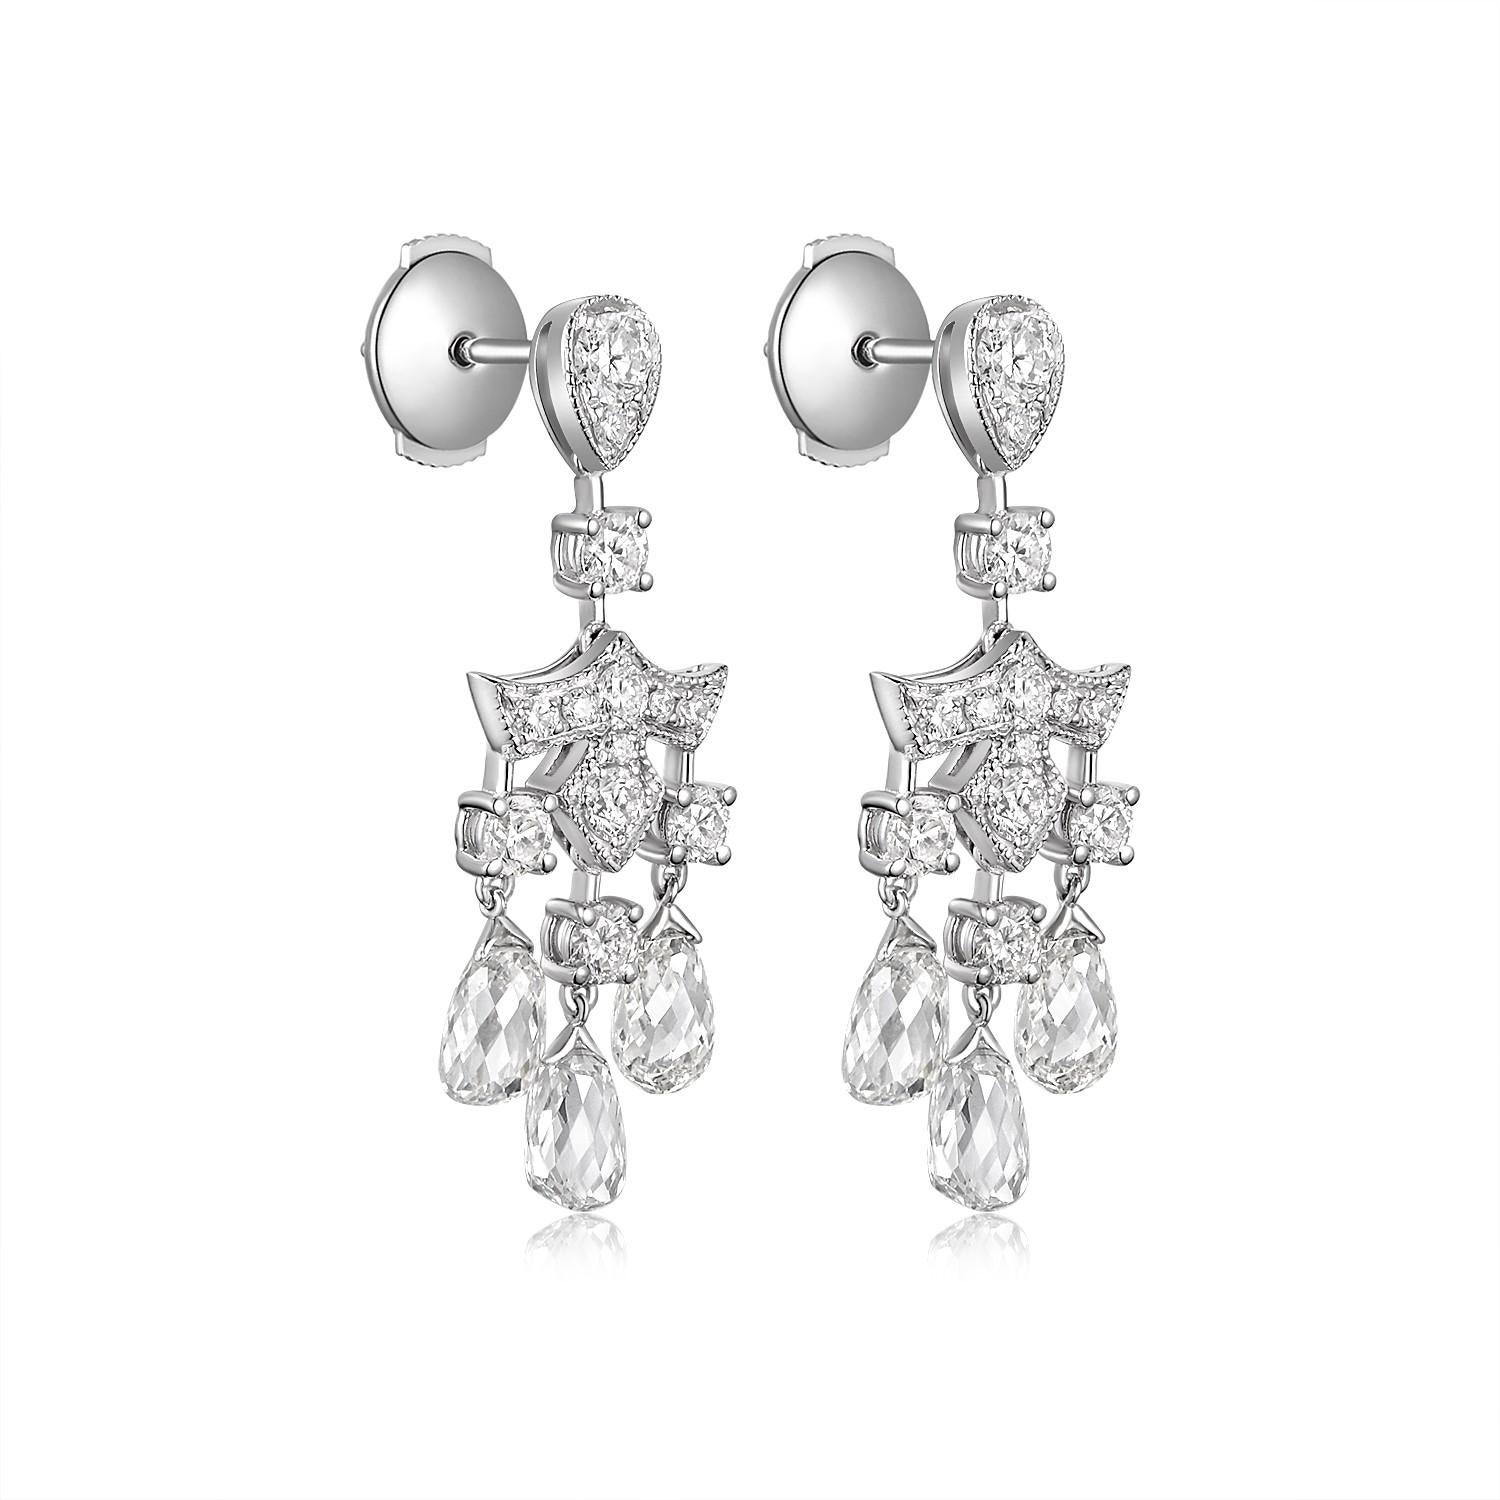 Experience the elegance of timeless design with these captivating earrings, a true testament to fine craftsmanship and luxury. The highlight of these earrings is the six briolette diamonds weighing a total of 3.46 carat, poised gracefully at the